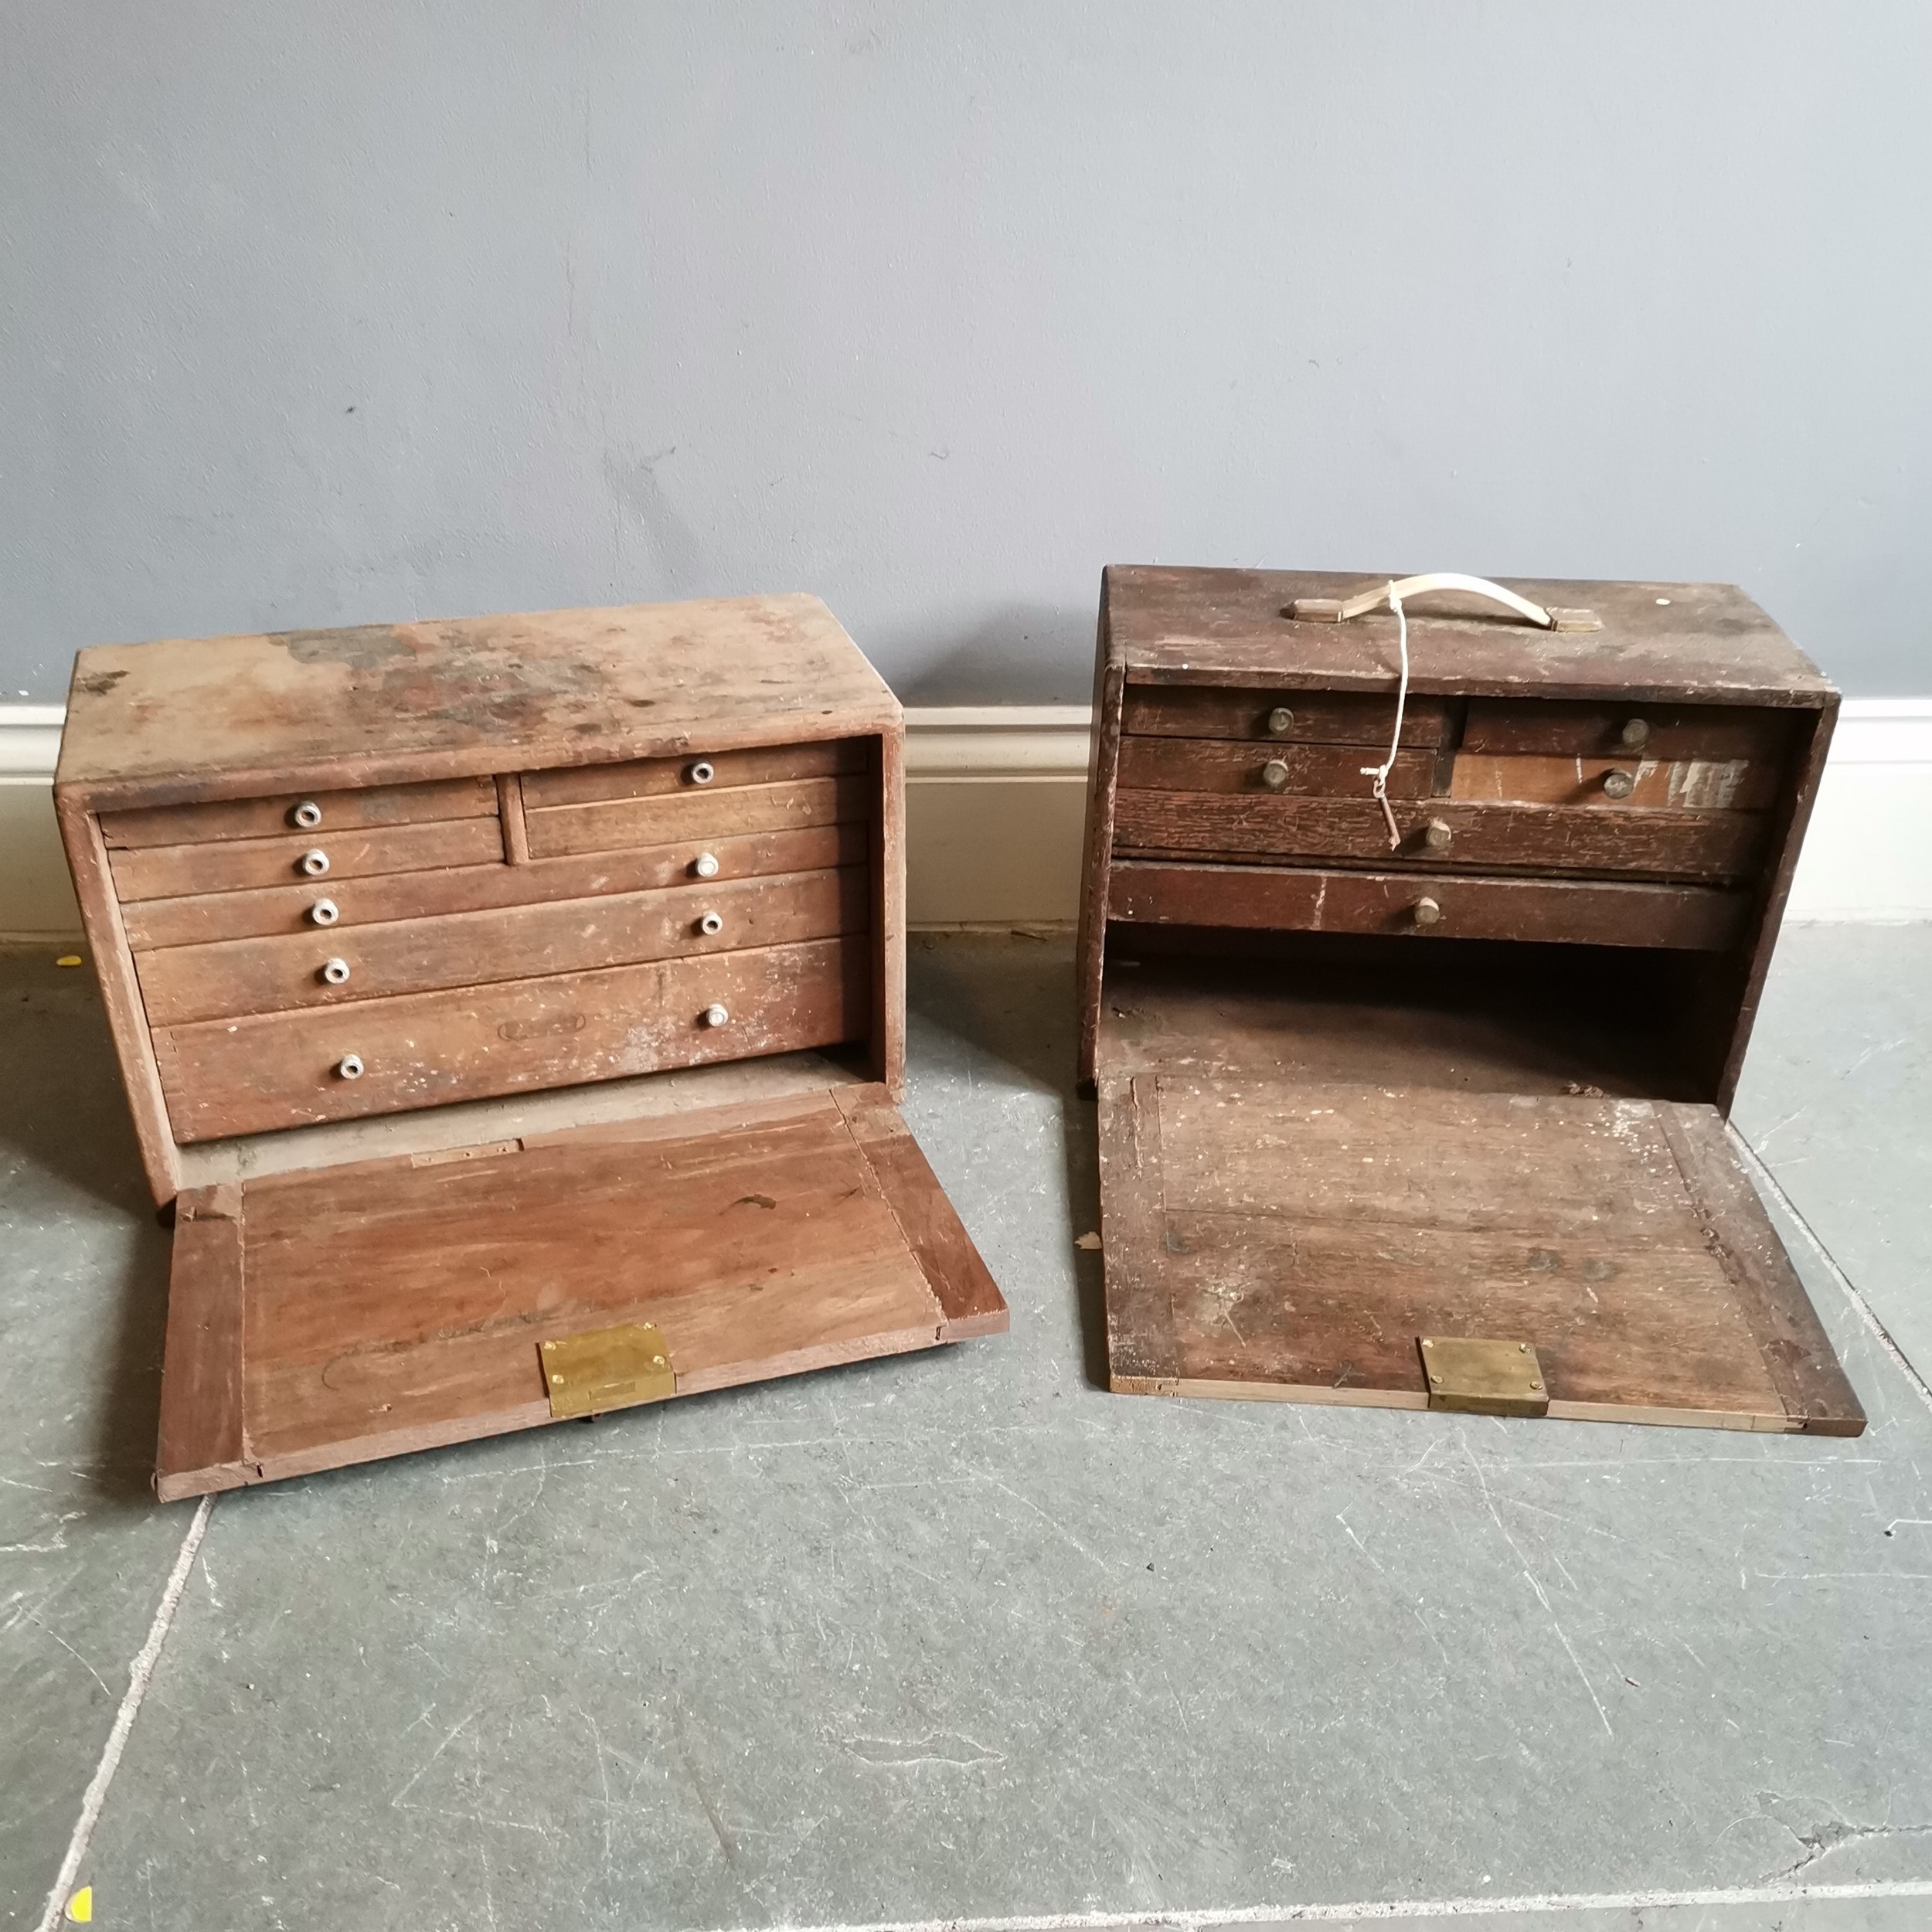 Vintage tool chest containing drawers, 43cm wide x 20cm deep x 30cm high, t/w 2 others., in used - Image 2 of 2